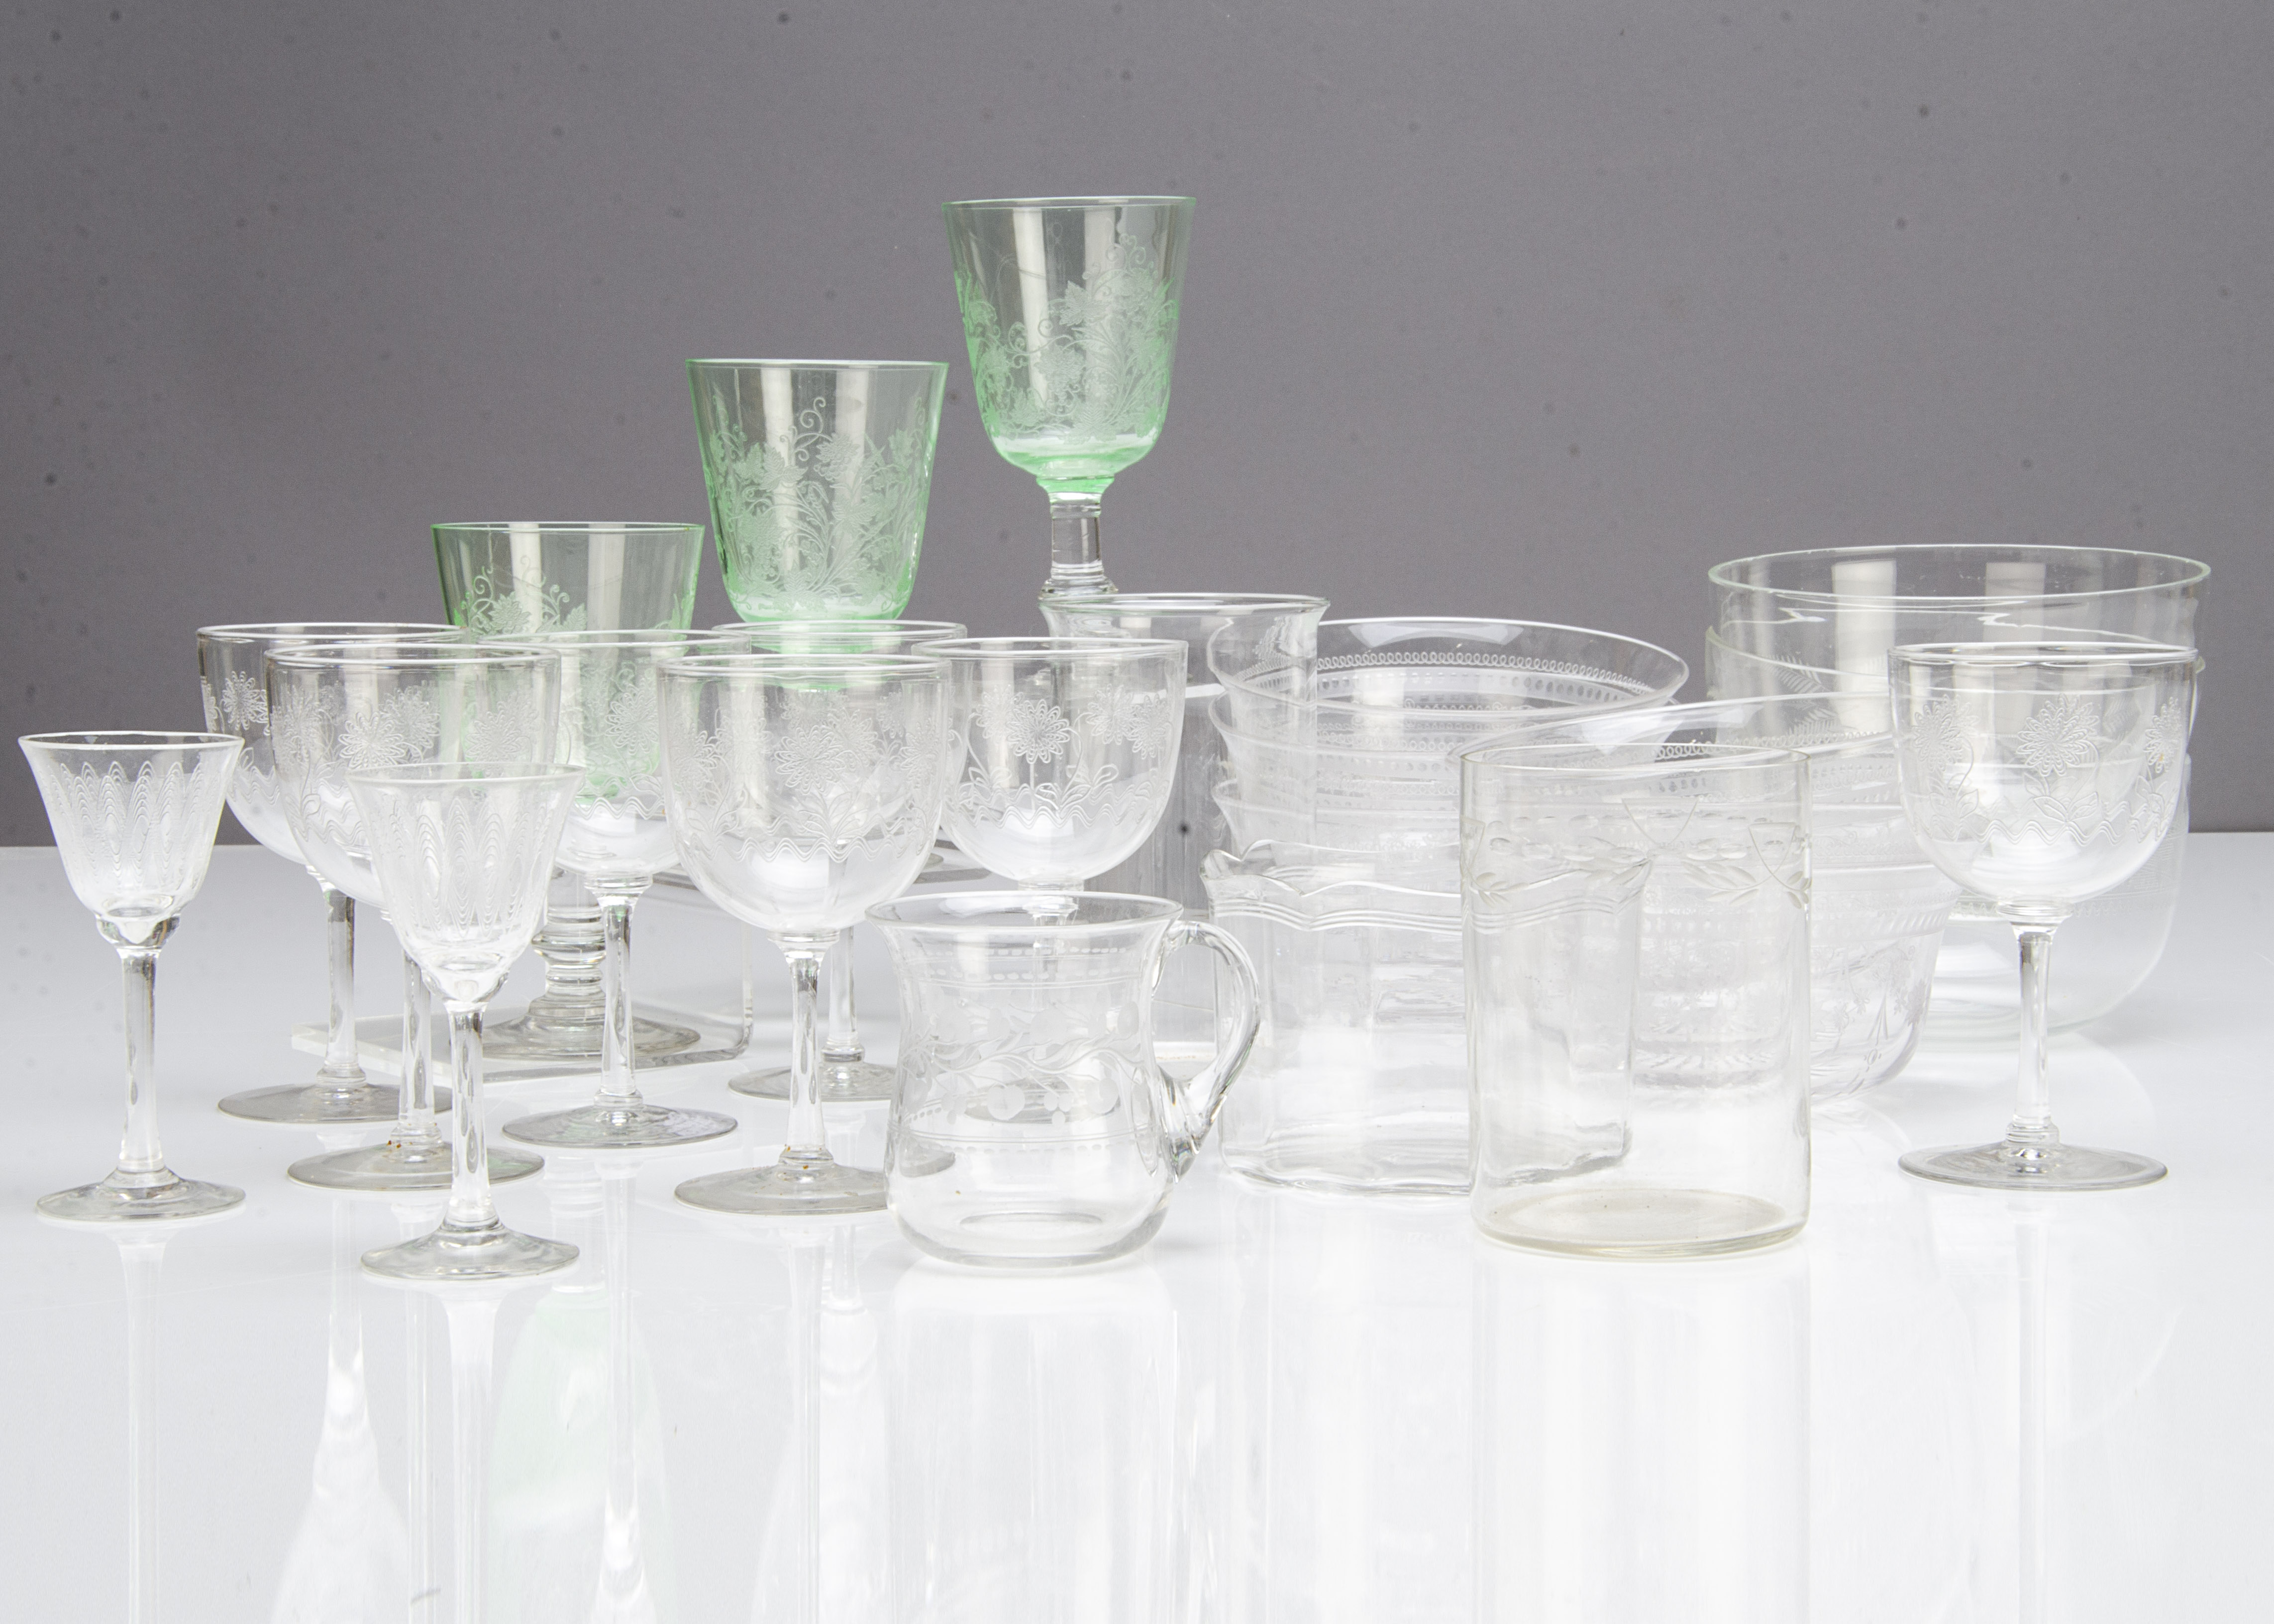 A collection of Edwardian etched glassware, including seven sherry glasses with floral design, three